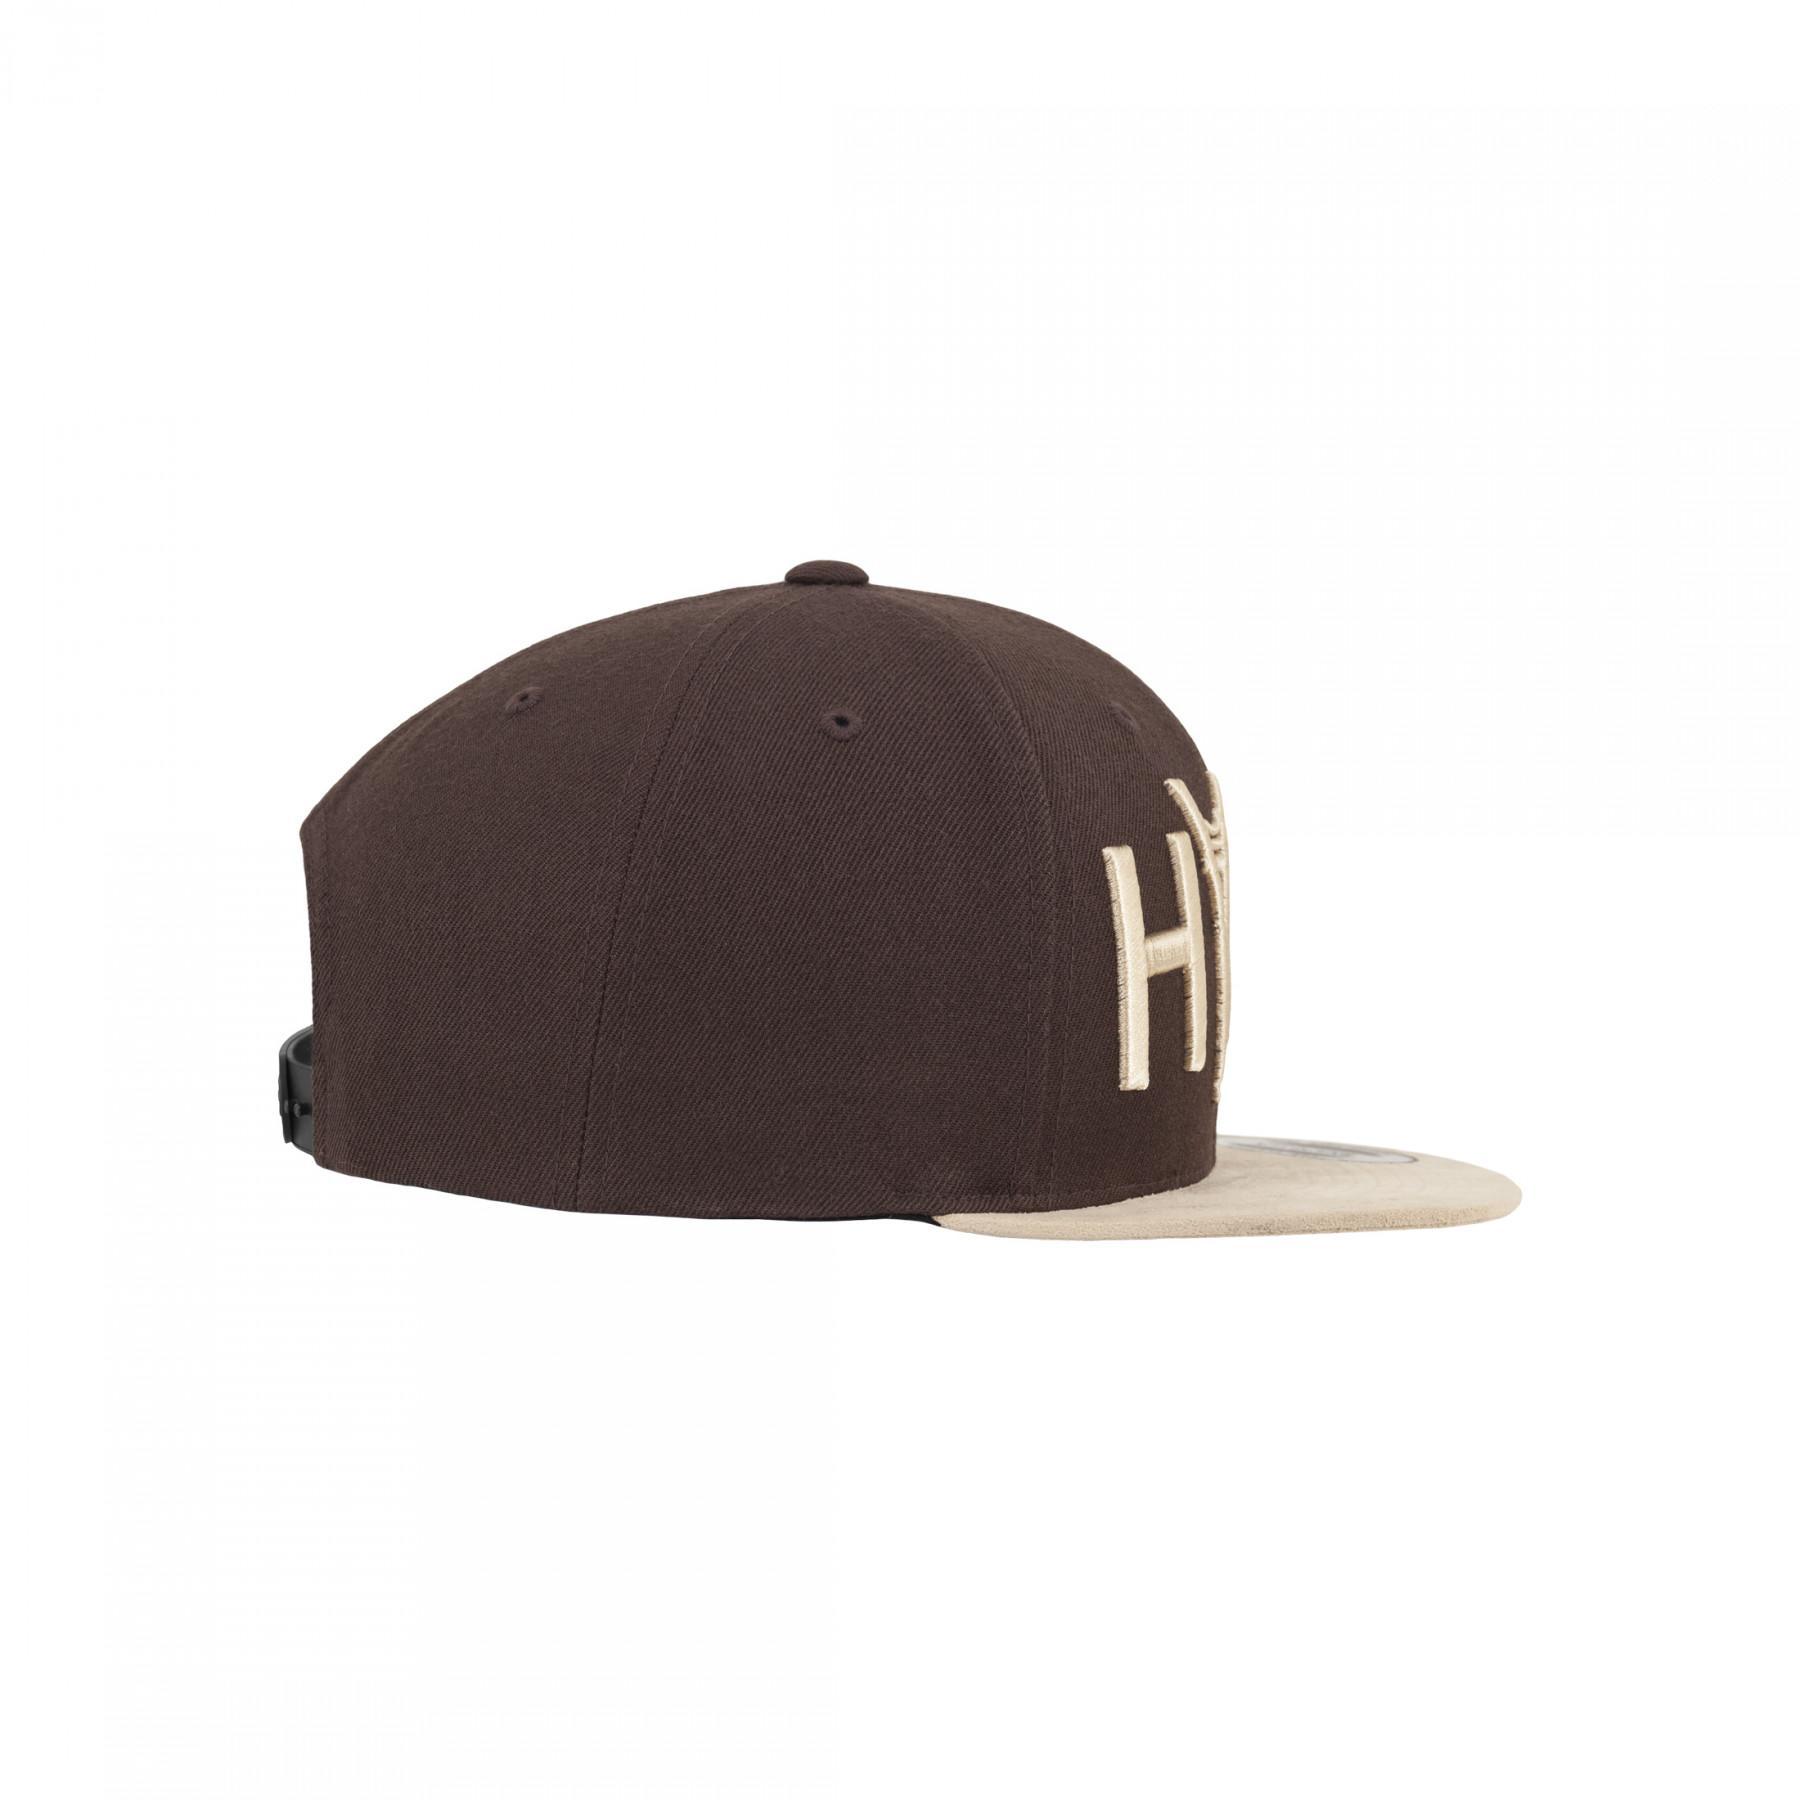 Casquette Mister Tee hype